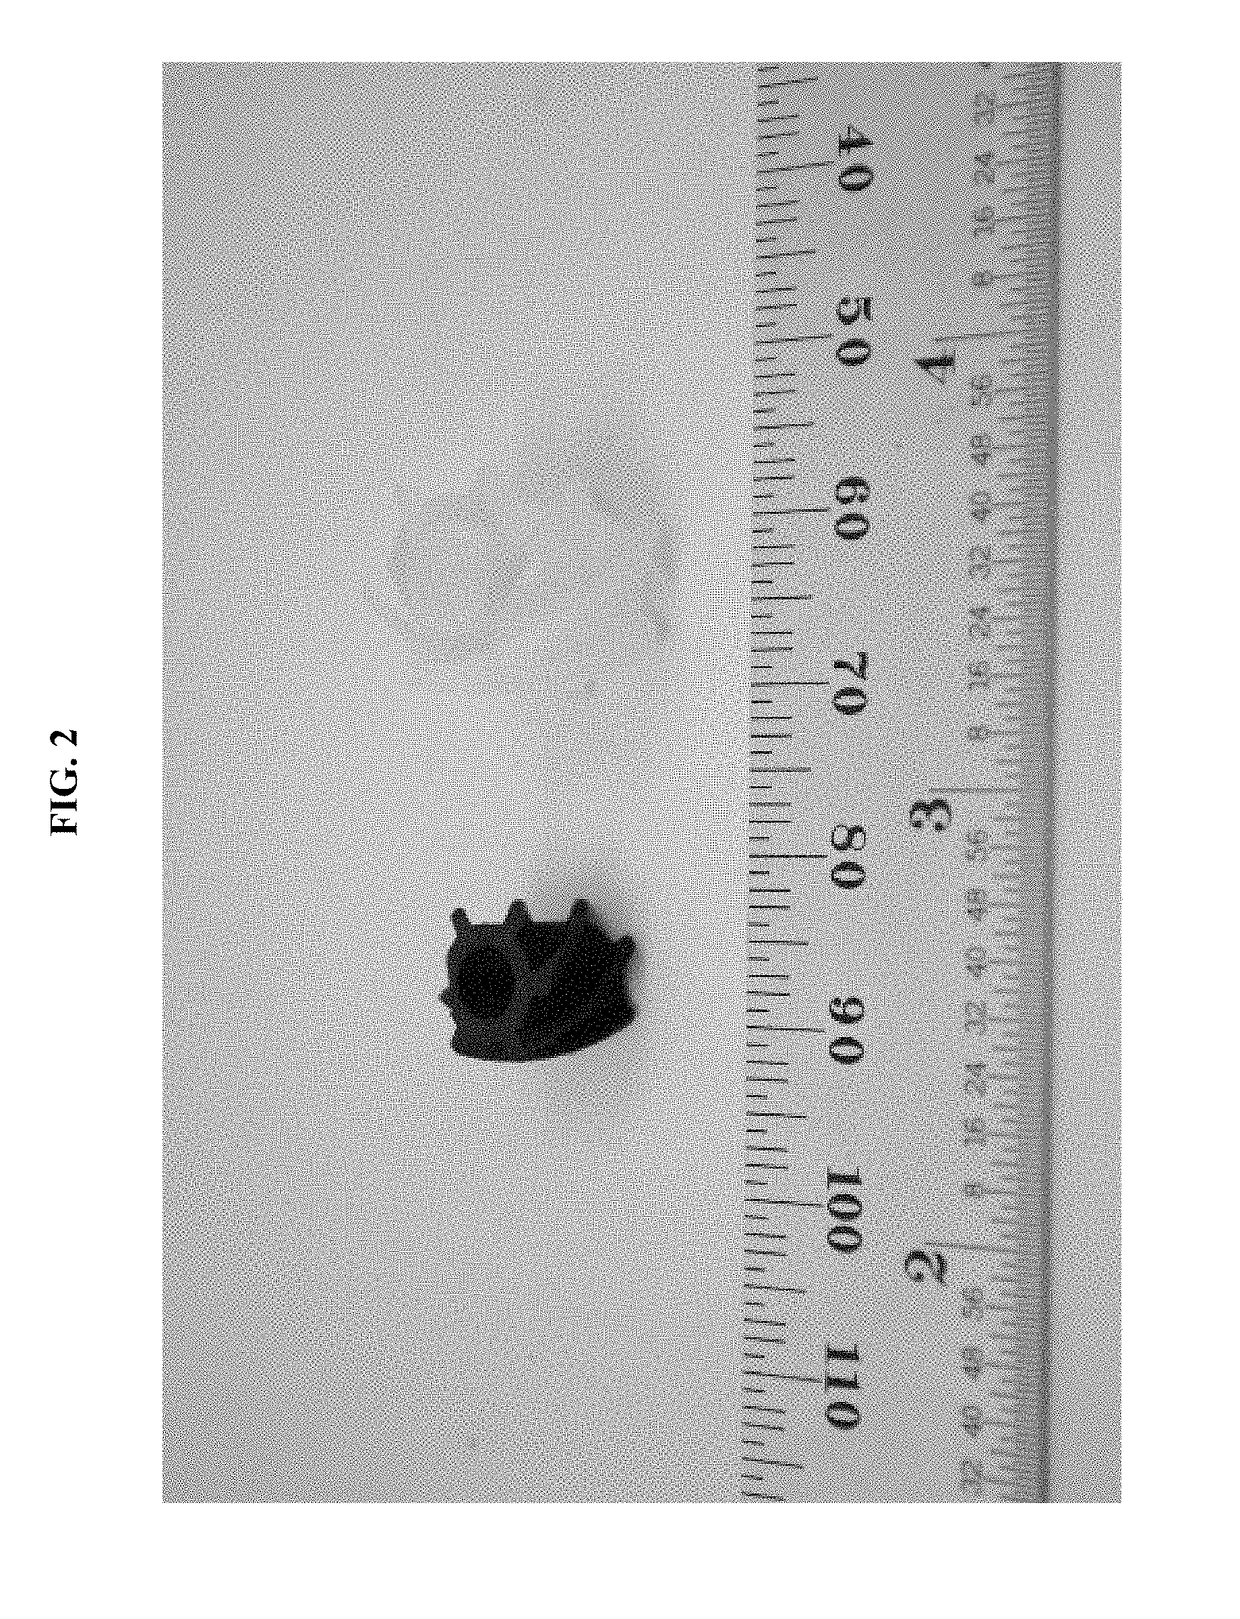 Monomer formulations and methods for 3D printing of preceramic polymers